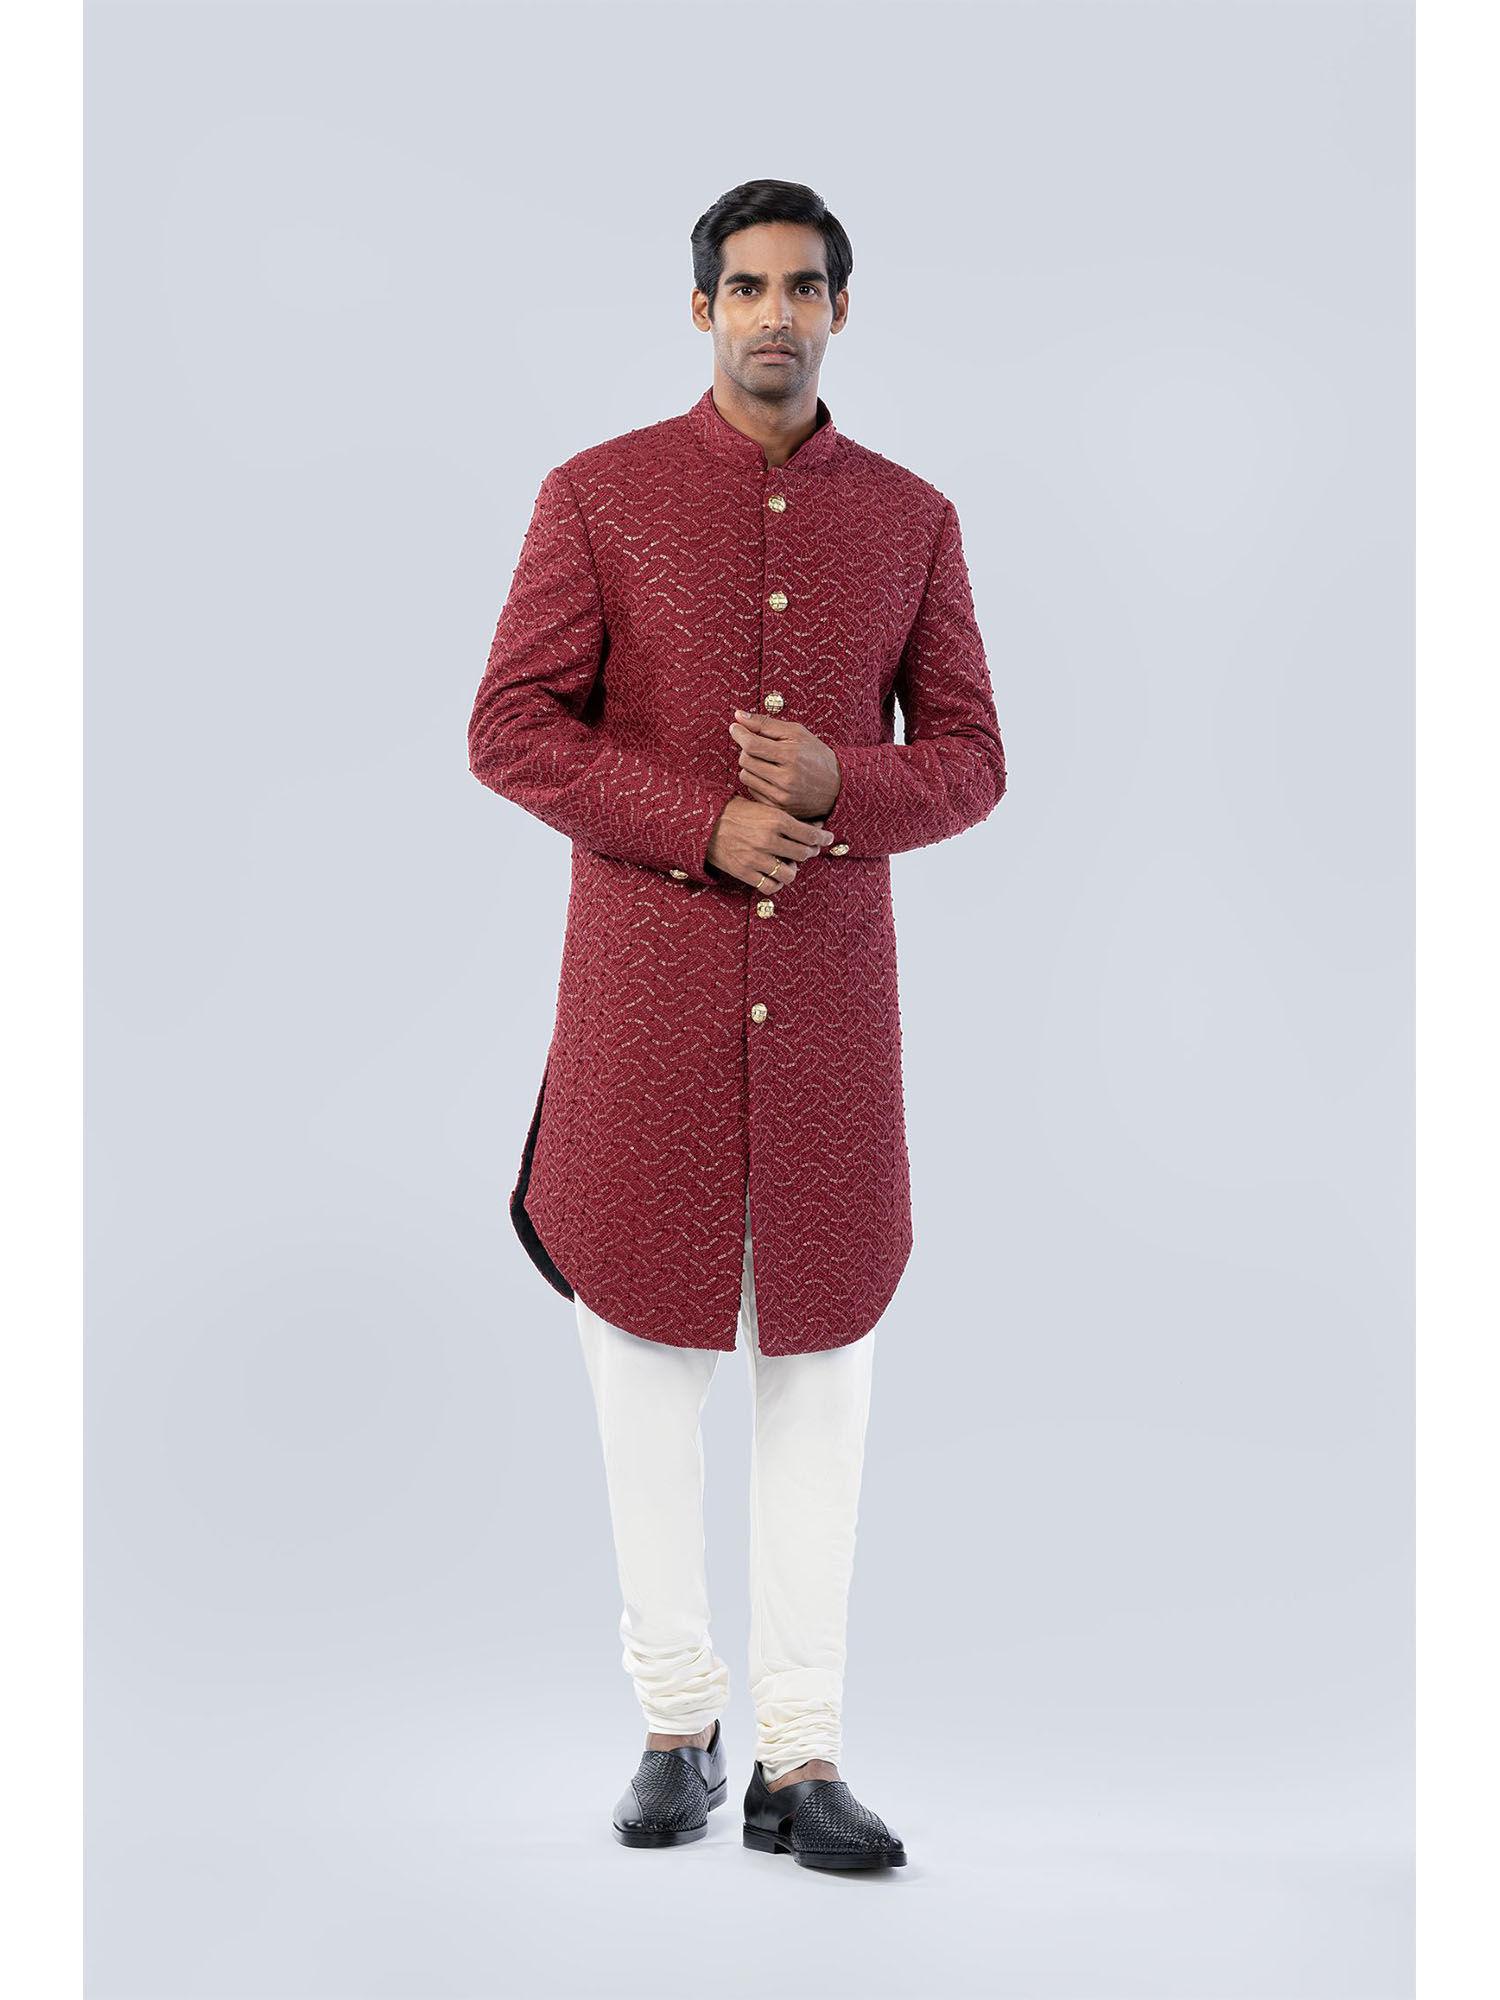 french knot and sequins embellishment sherwani (set of 2)